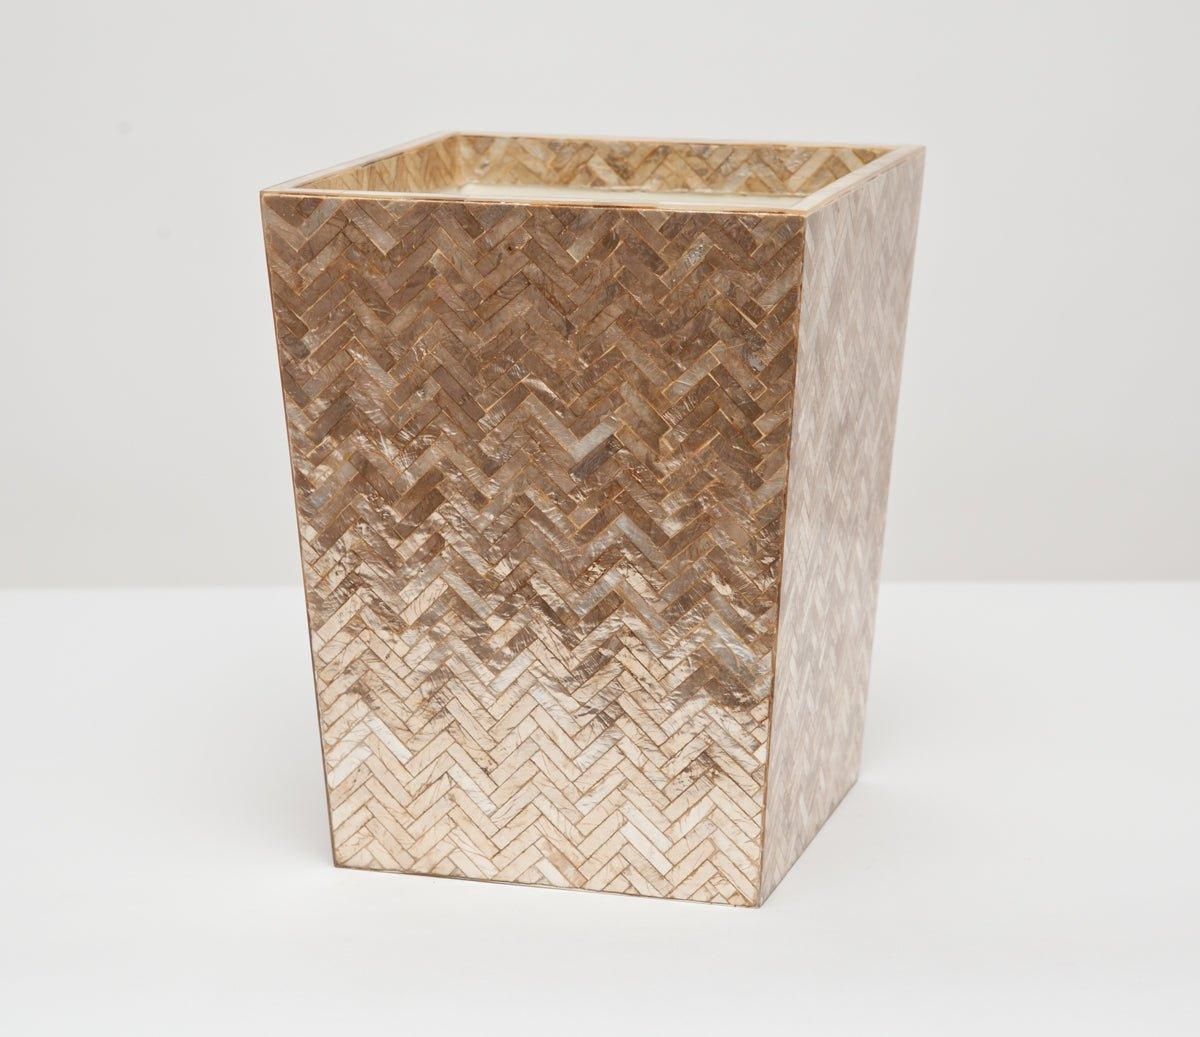 Pigeon & Poodle Handa Herringbone Capiz Shell Square Wastebasket in Sm | The Well Appointed House, LLC